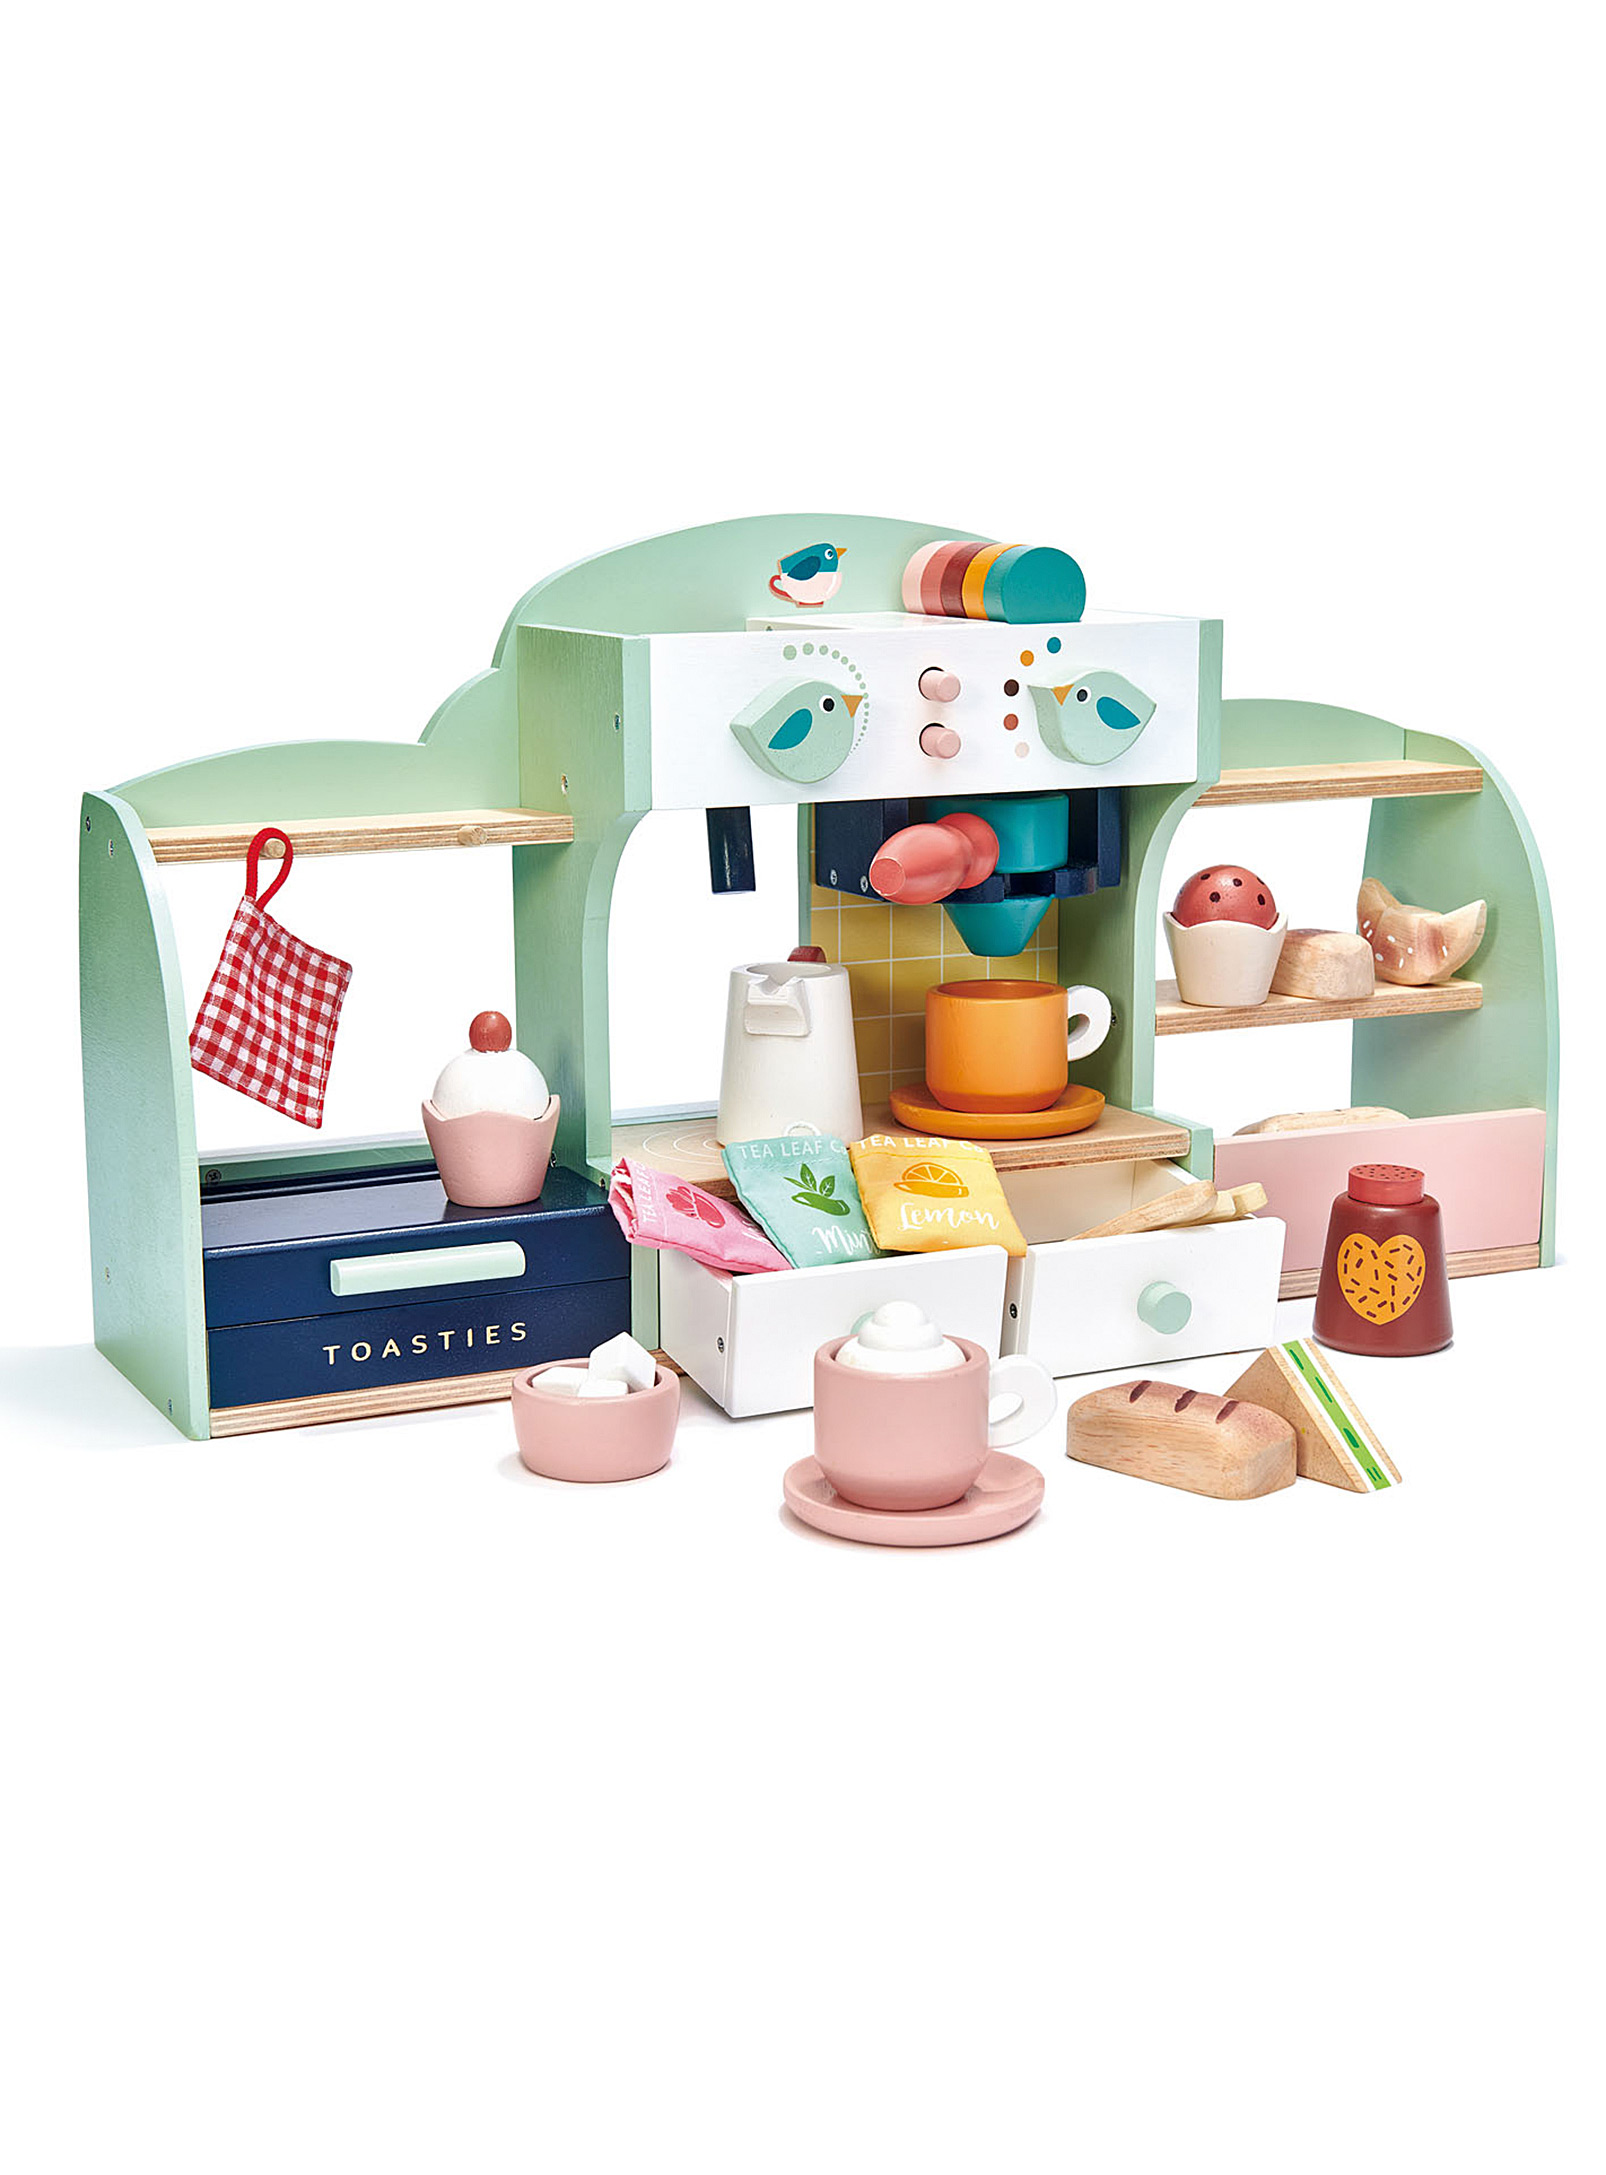 Tender Leaf Toys - Wooden coffee shop and accessories 41-piece set